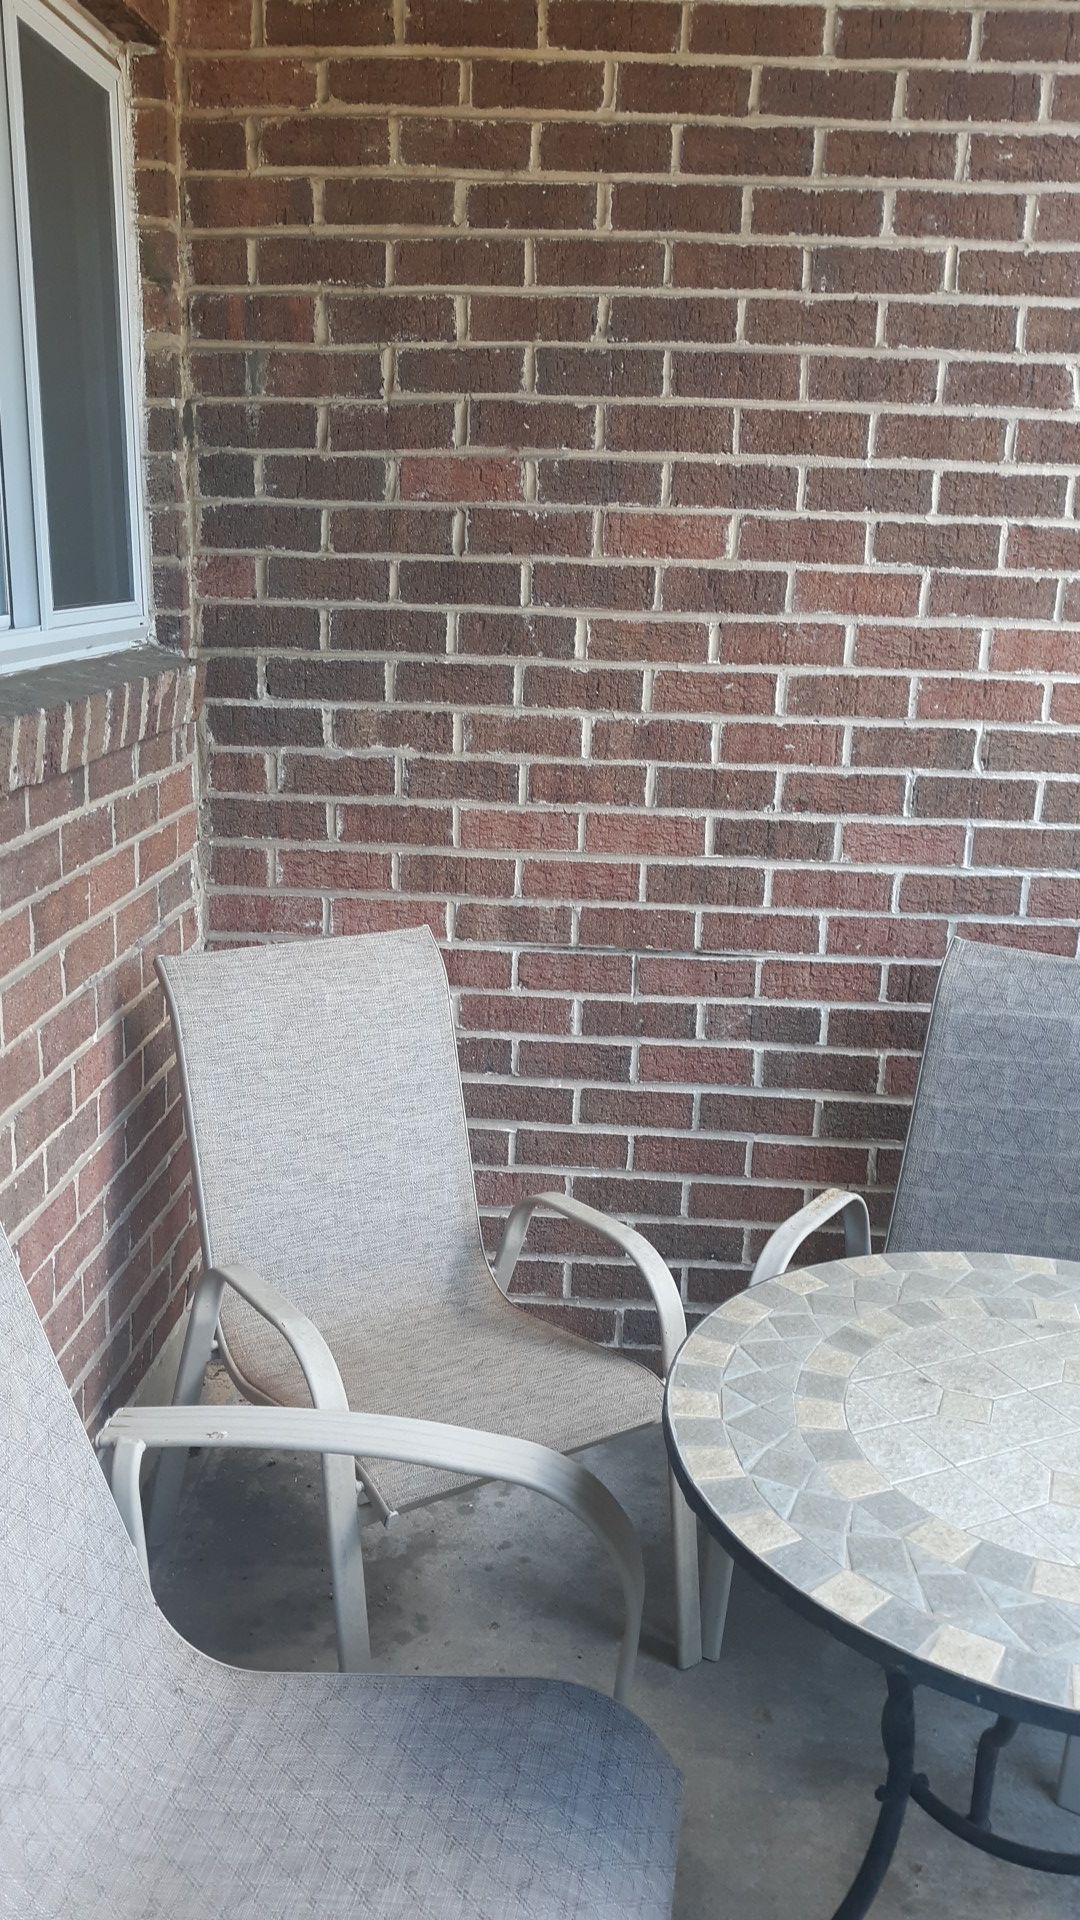 Patio furniture - tile top table and 4 chairs